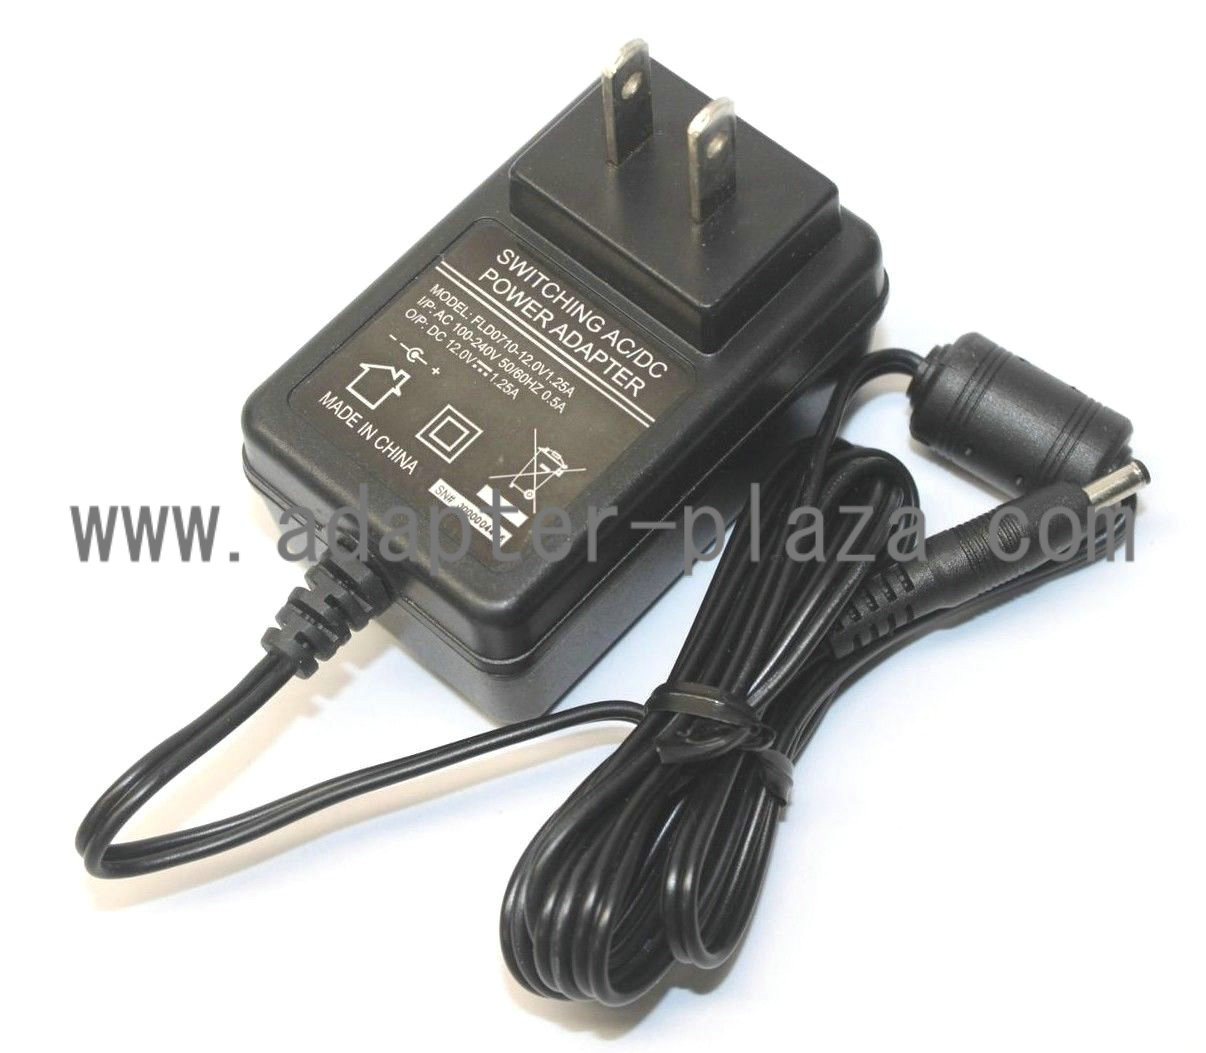 NEW 12V 1.25A AC Adapter FLD0710-12.0V1.25A Switching Power Supply - Click Image to Close